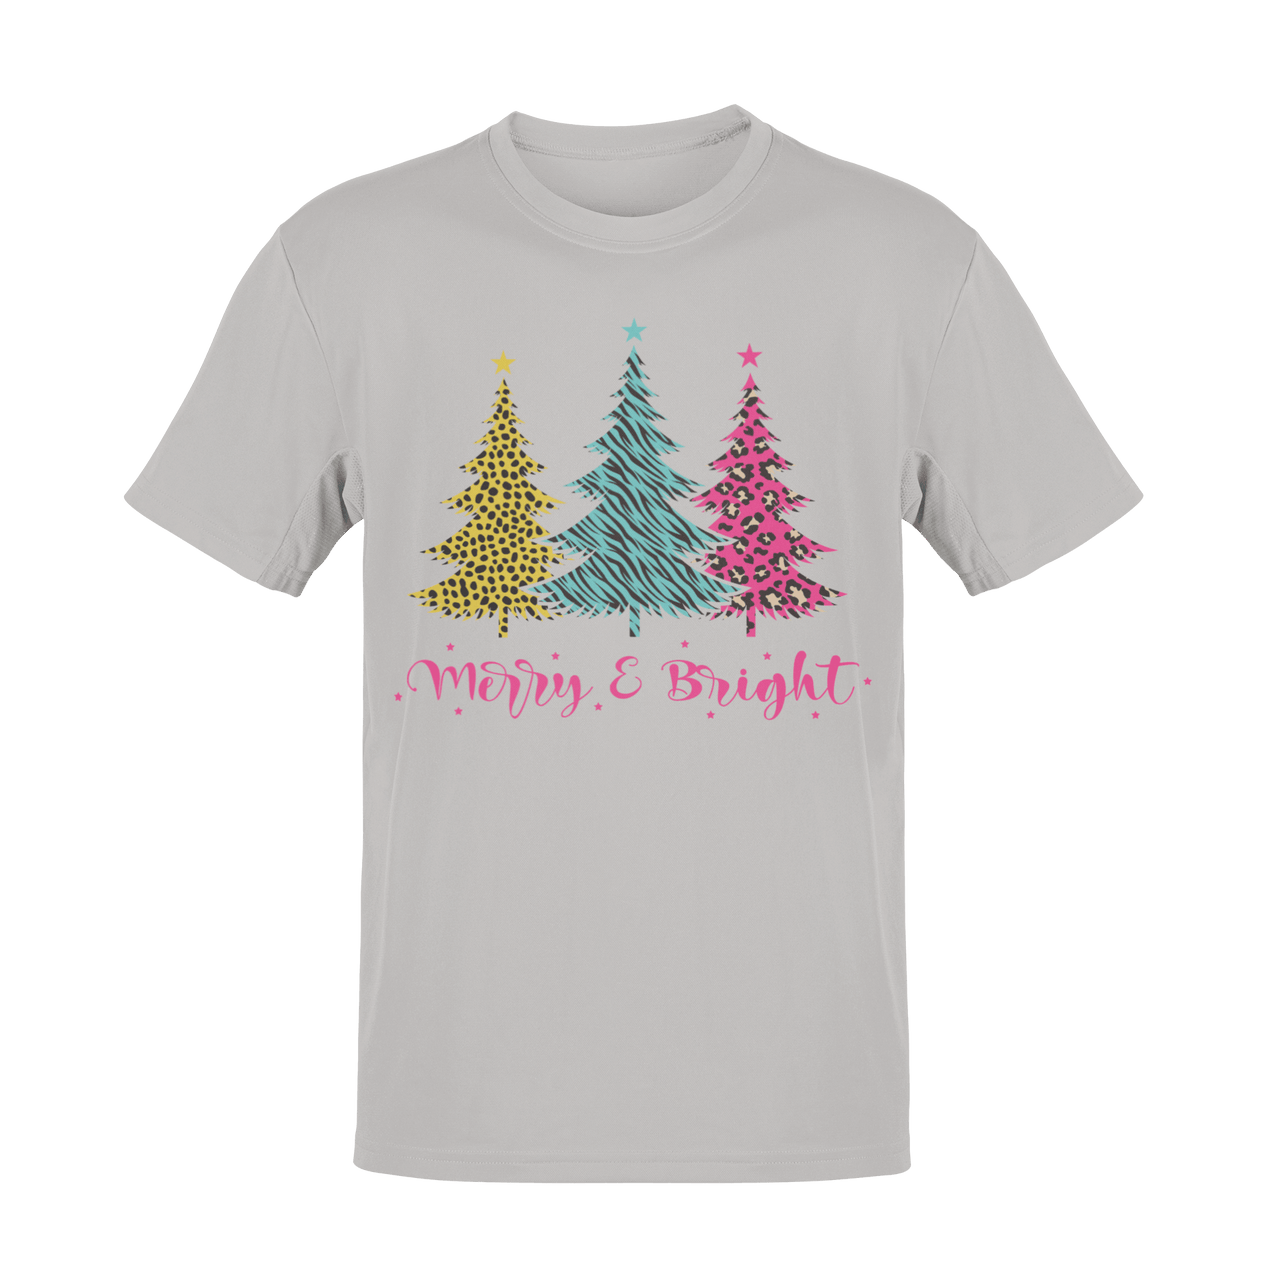 Unisex Triple Christmas Tree Adult for Men and Women Graphic T-Shirt For Men 8Ball